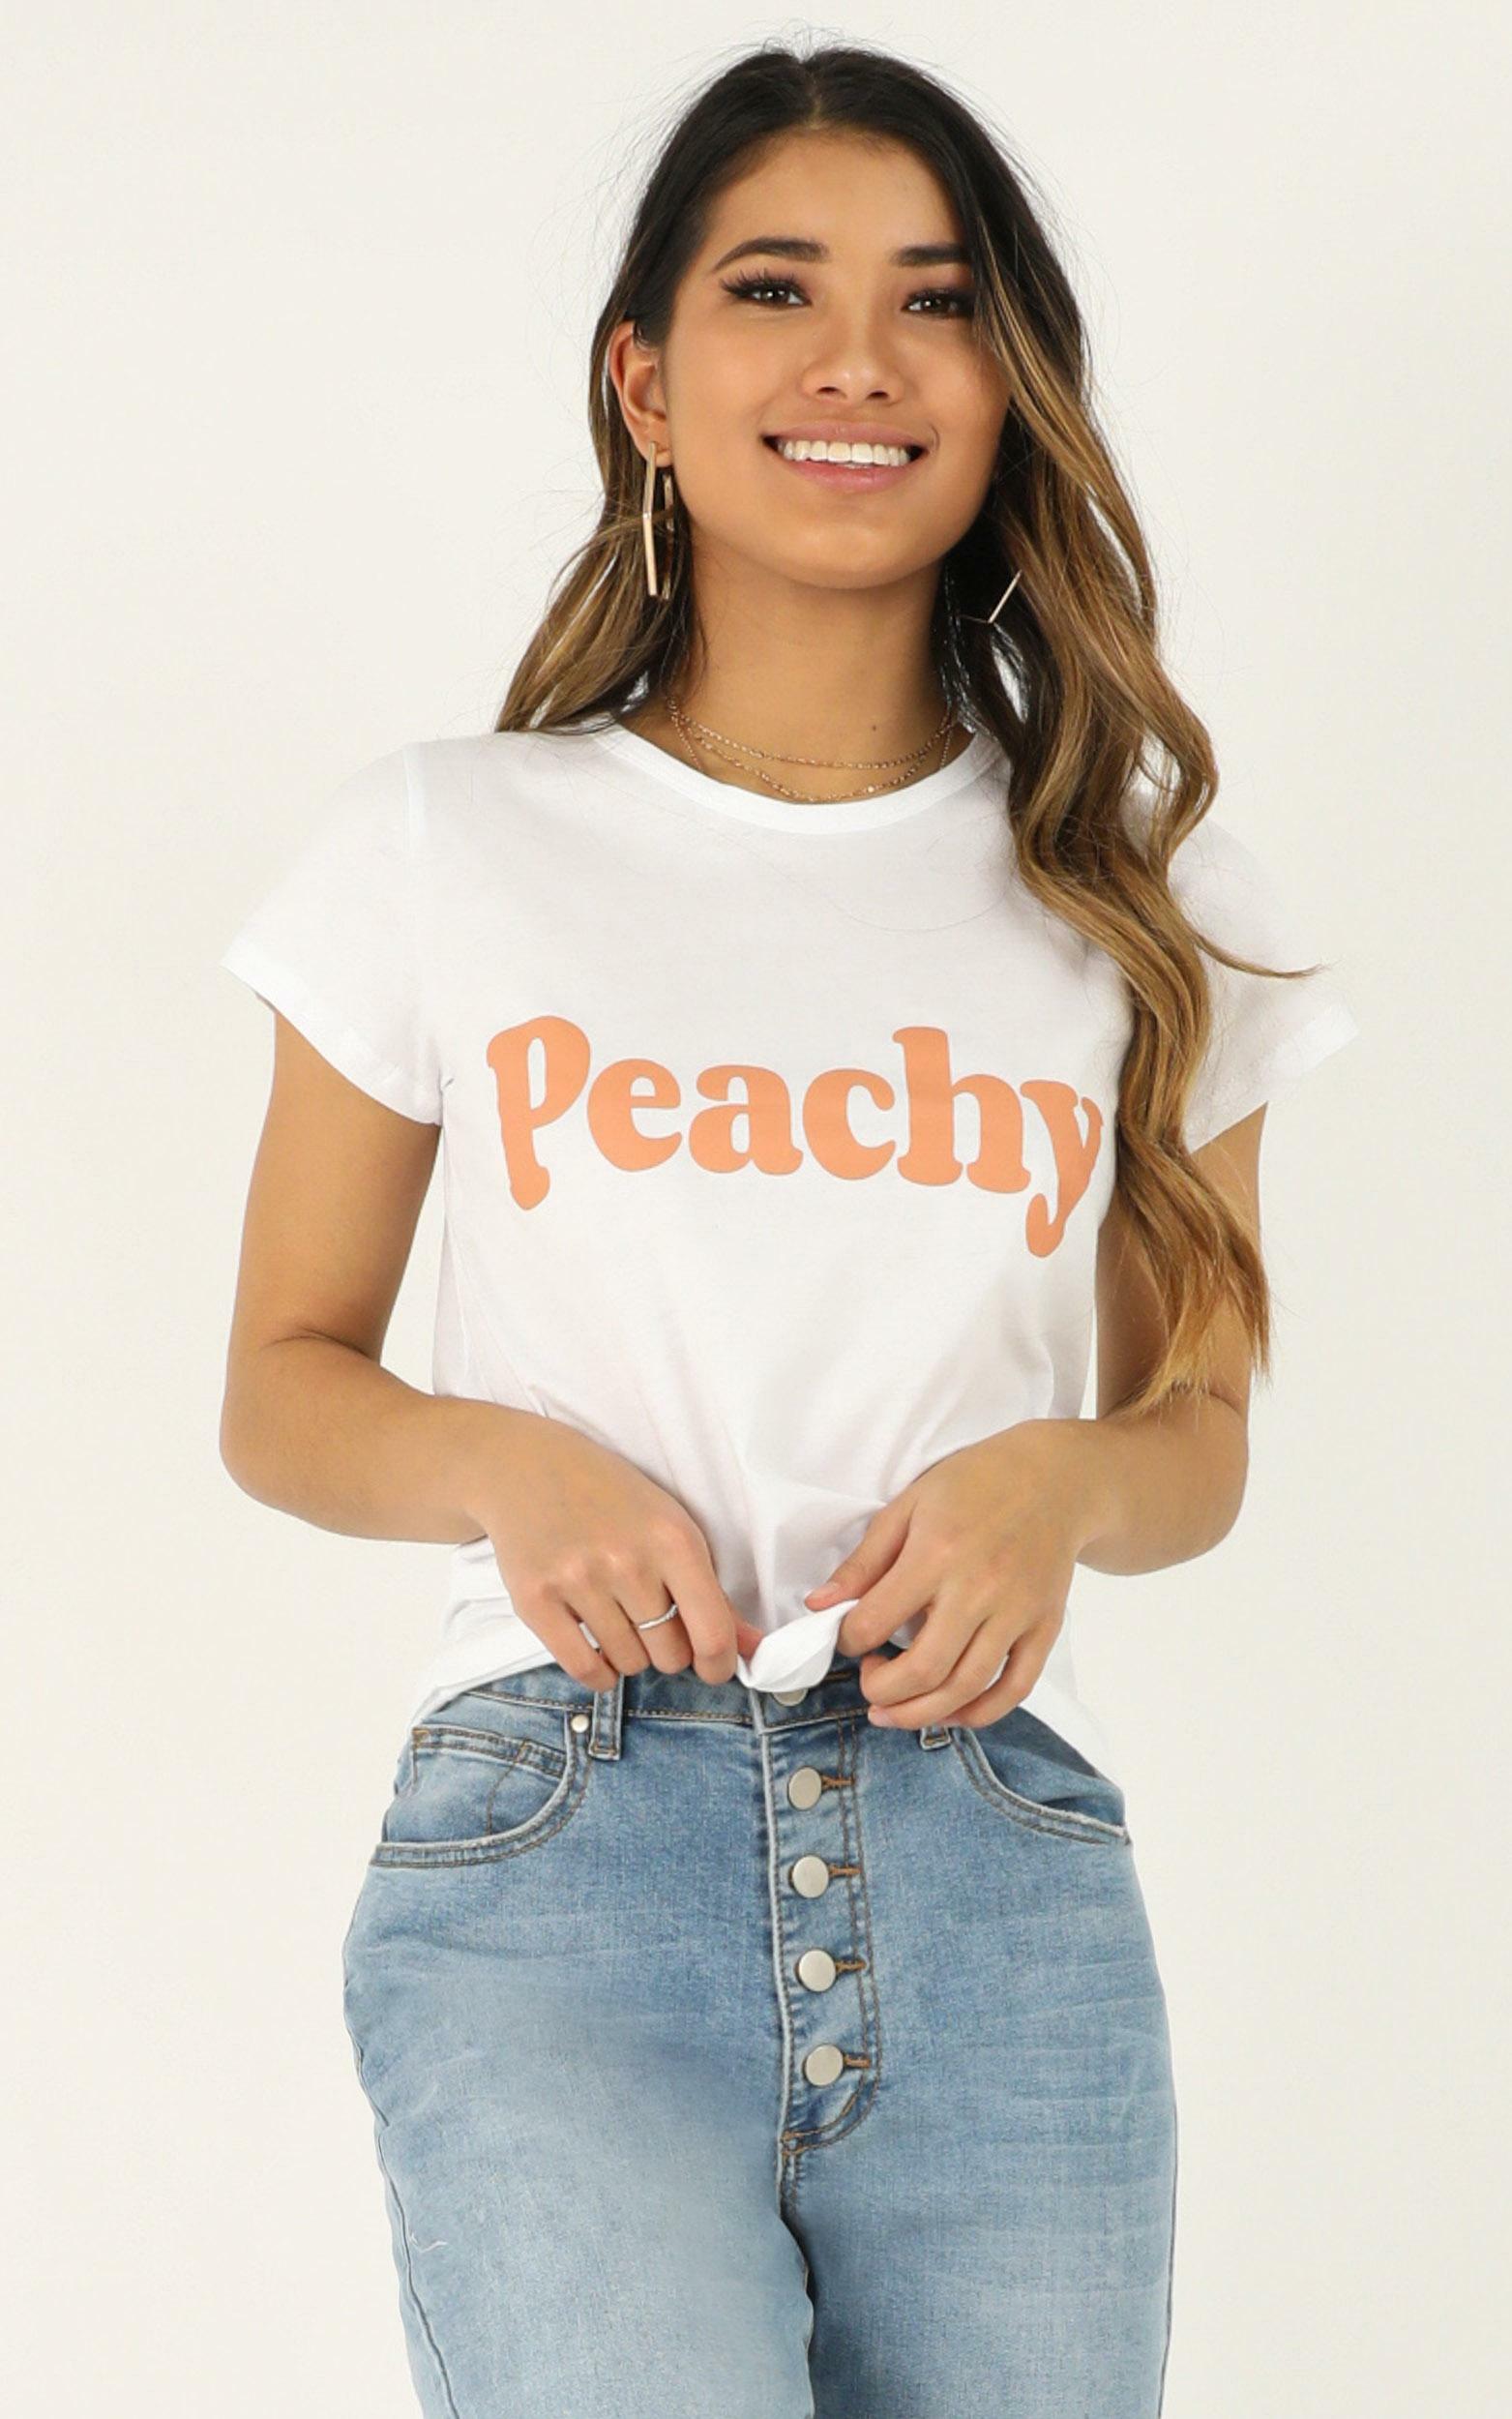 Peachy Tee in white - 12 (L), White, hi-res image number null